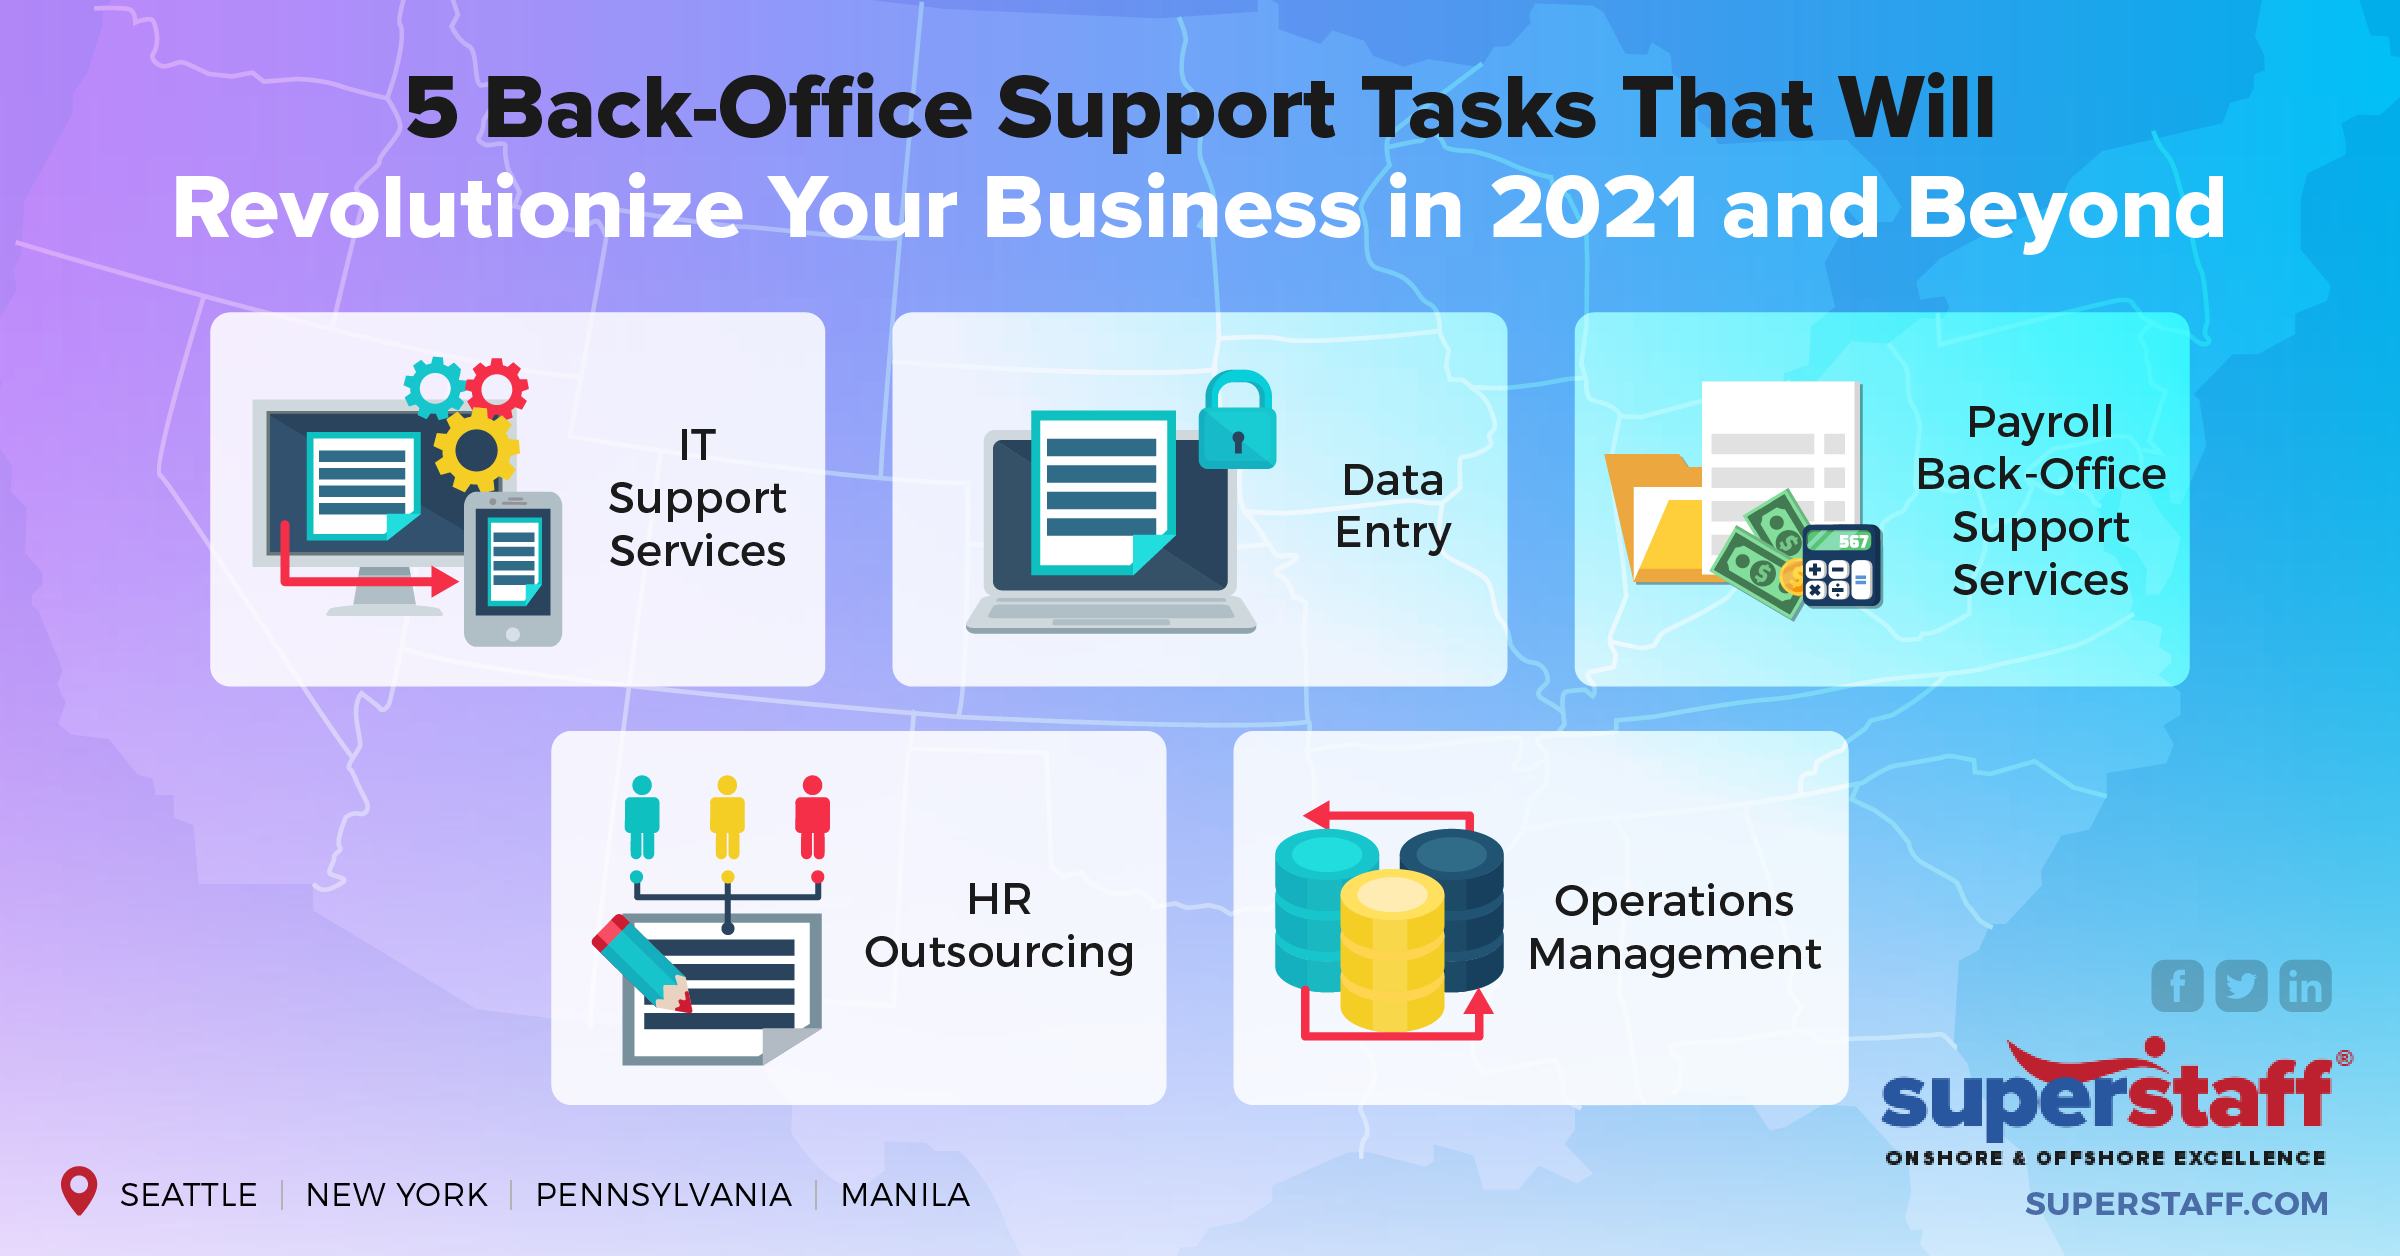 Outsource These Back Office Support Services | SuperStaff